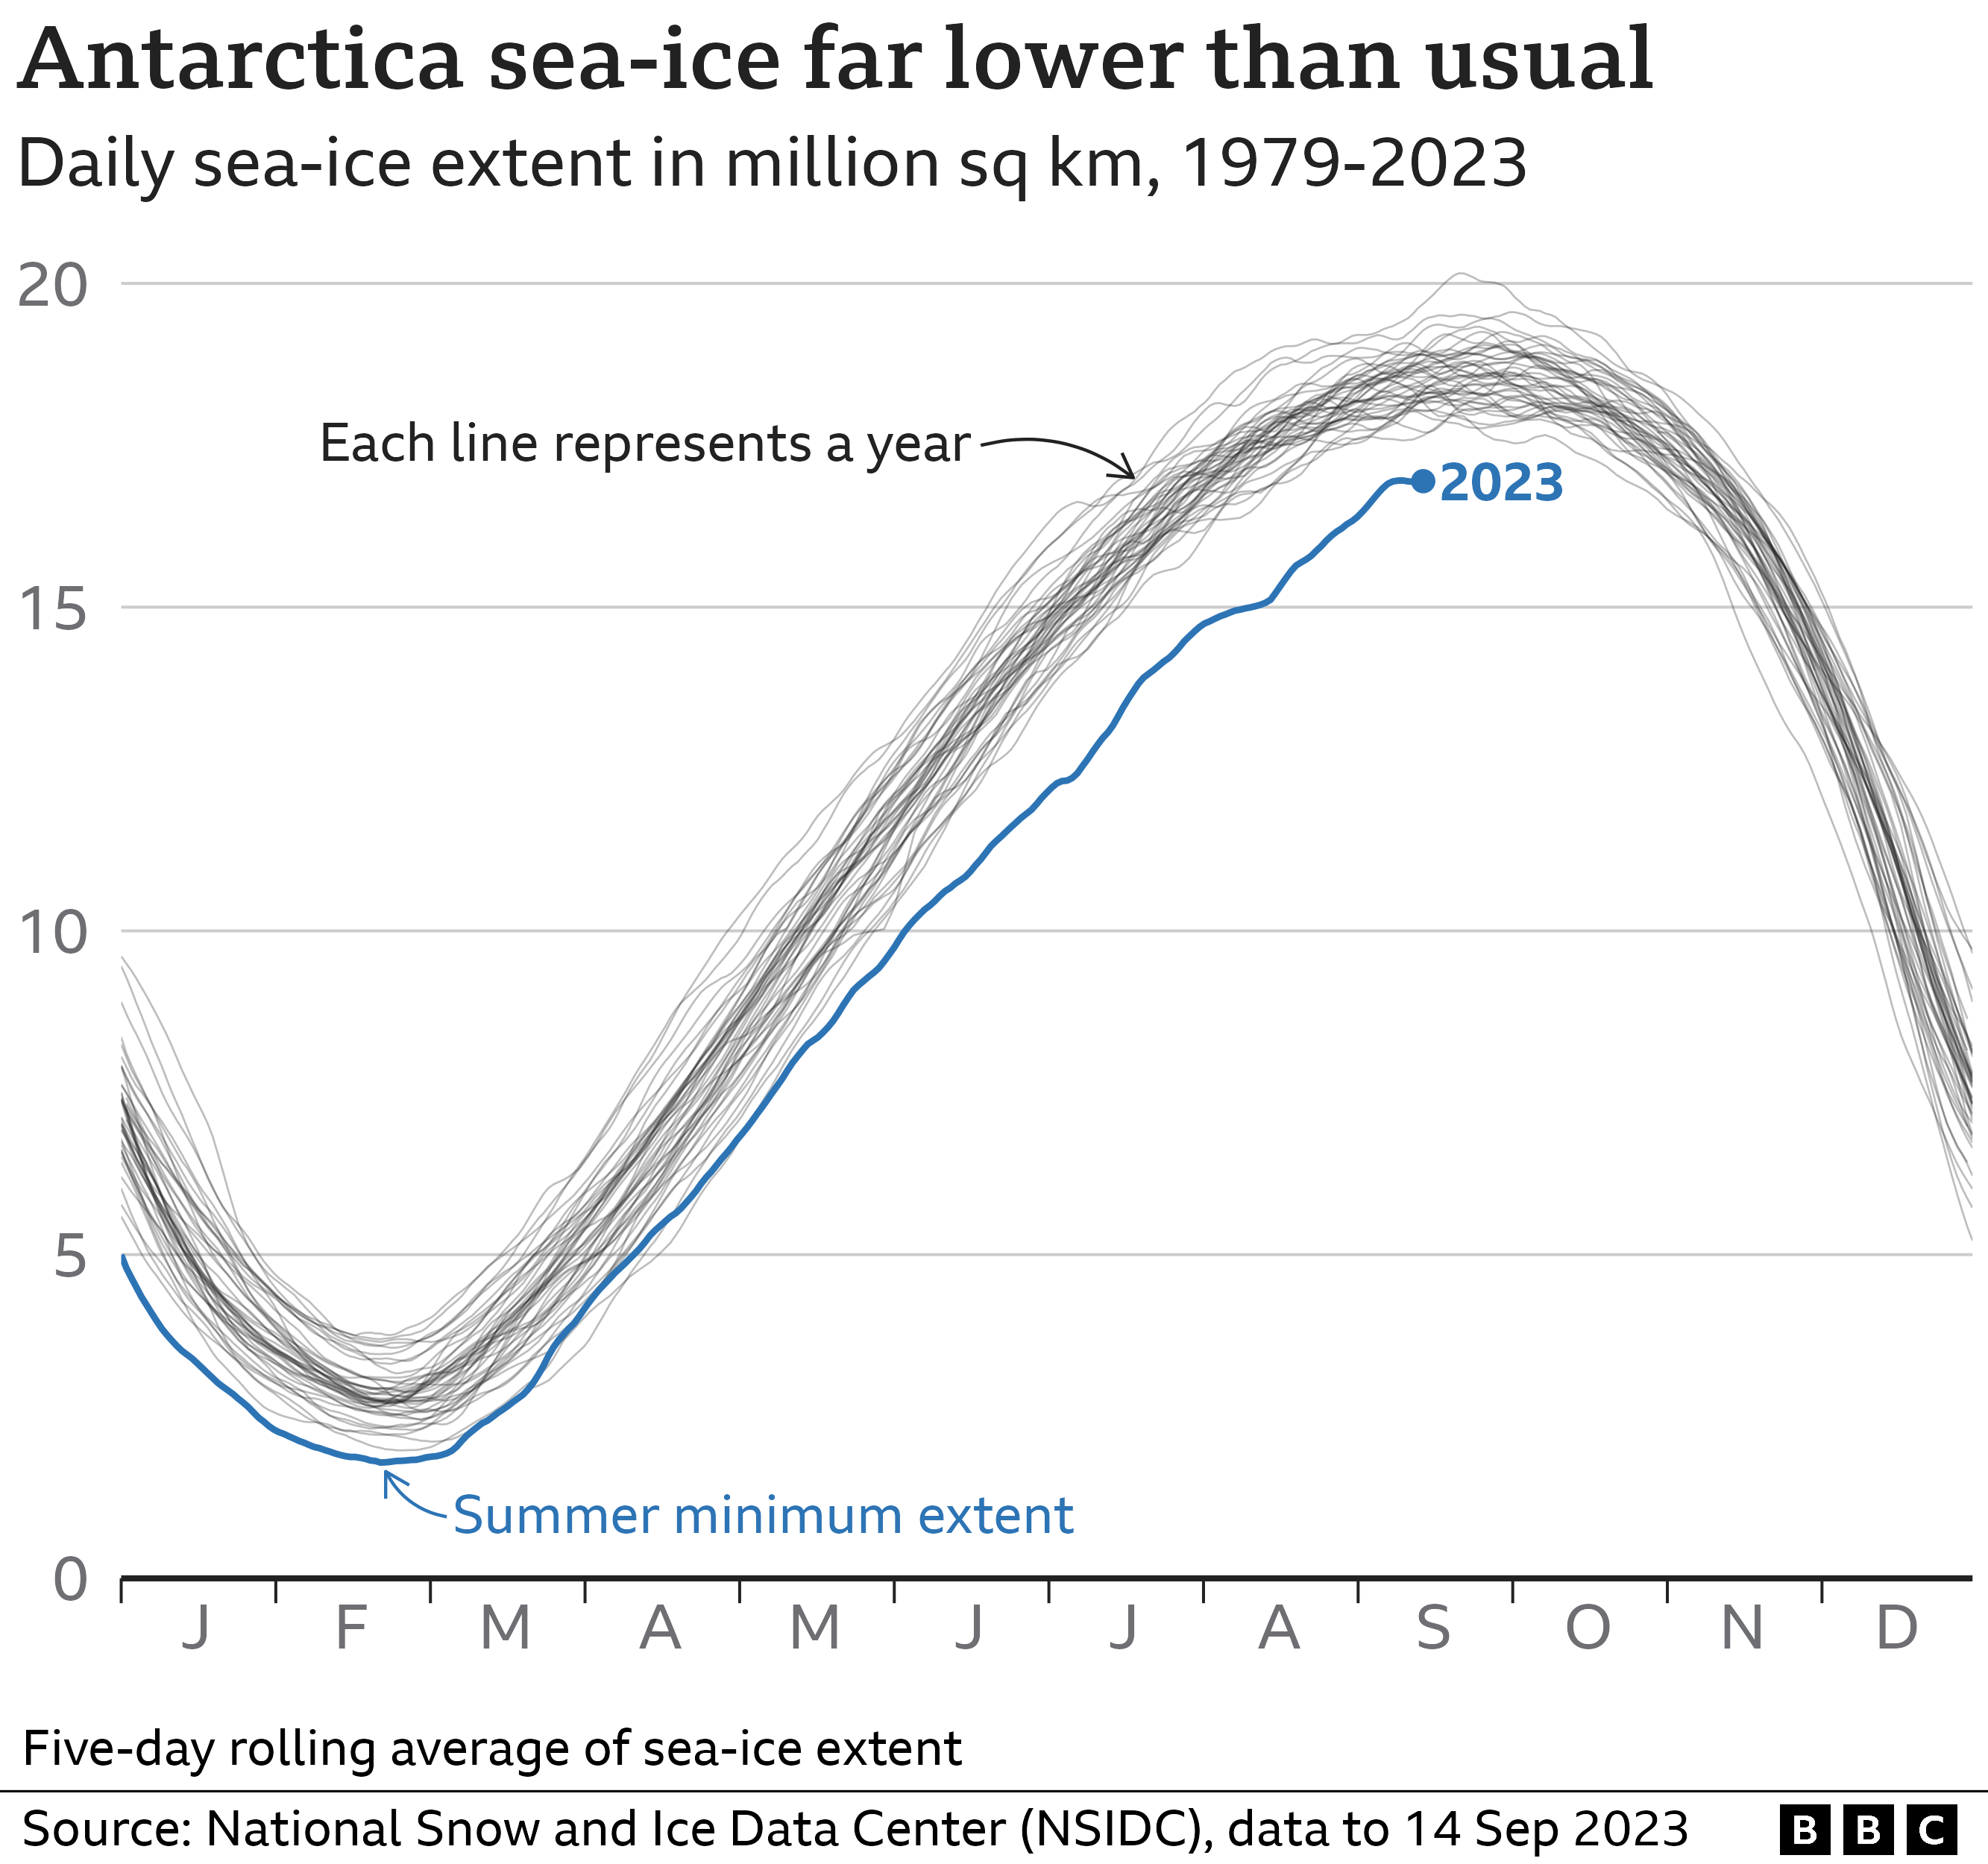 graph showing sea-ice extent in Antarctica and that sea-ice is far lower than usual